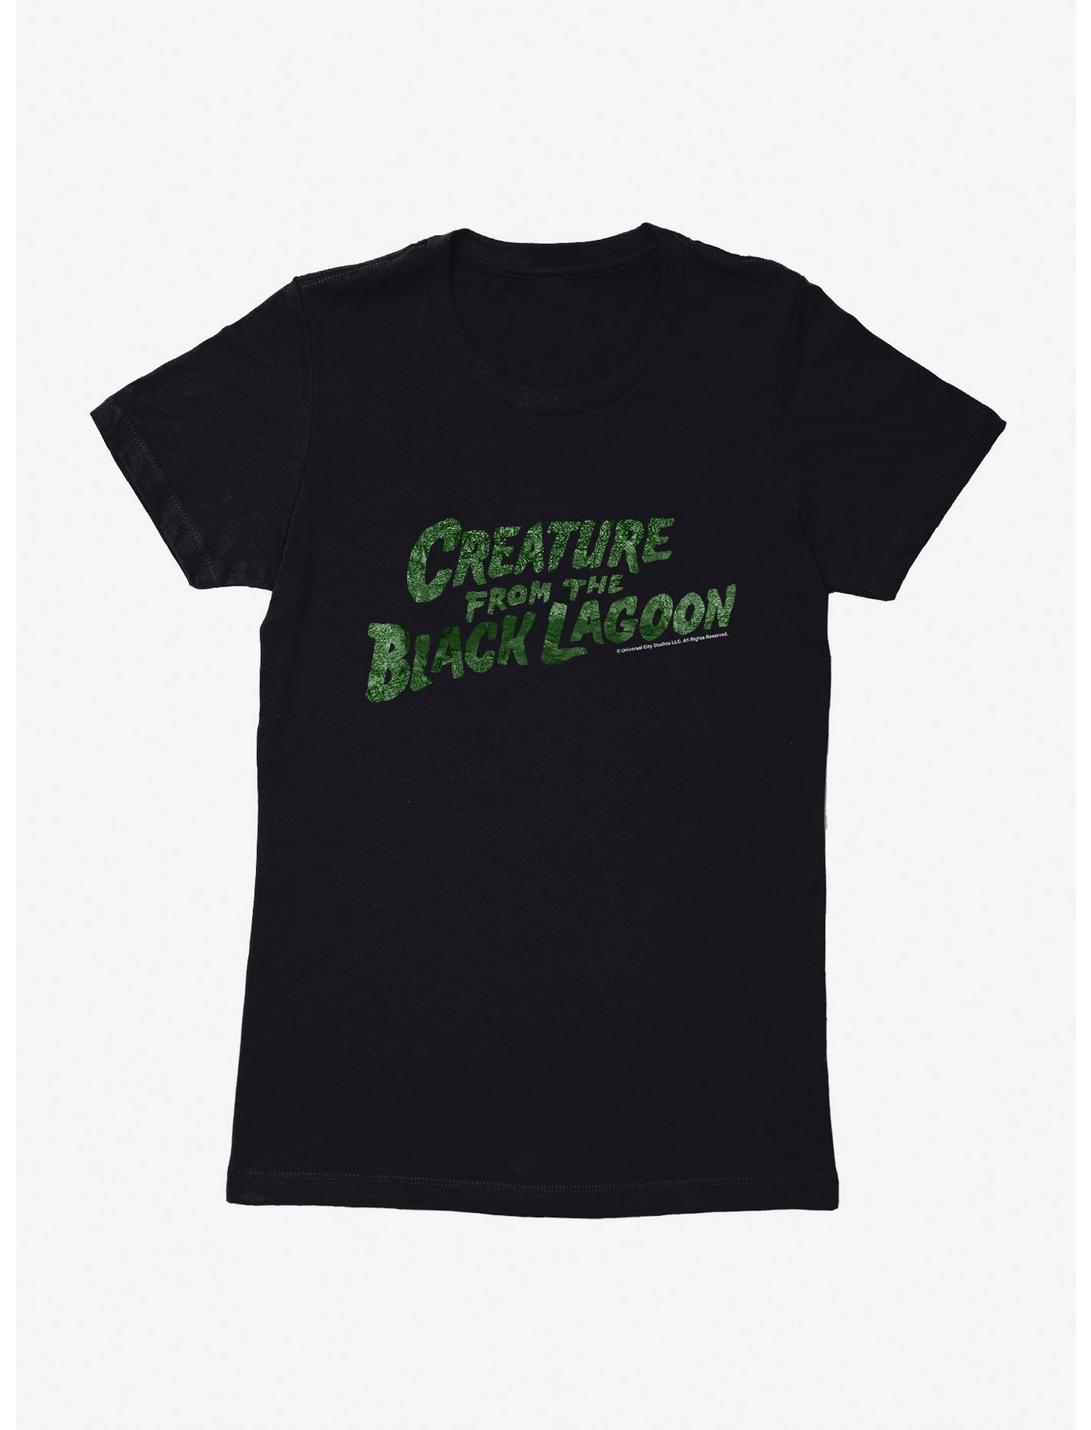 The Creature From The Black Lagoon Title Womens T-Shirt, BLACK, hi-res